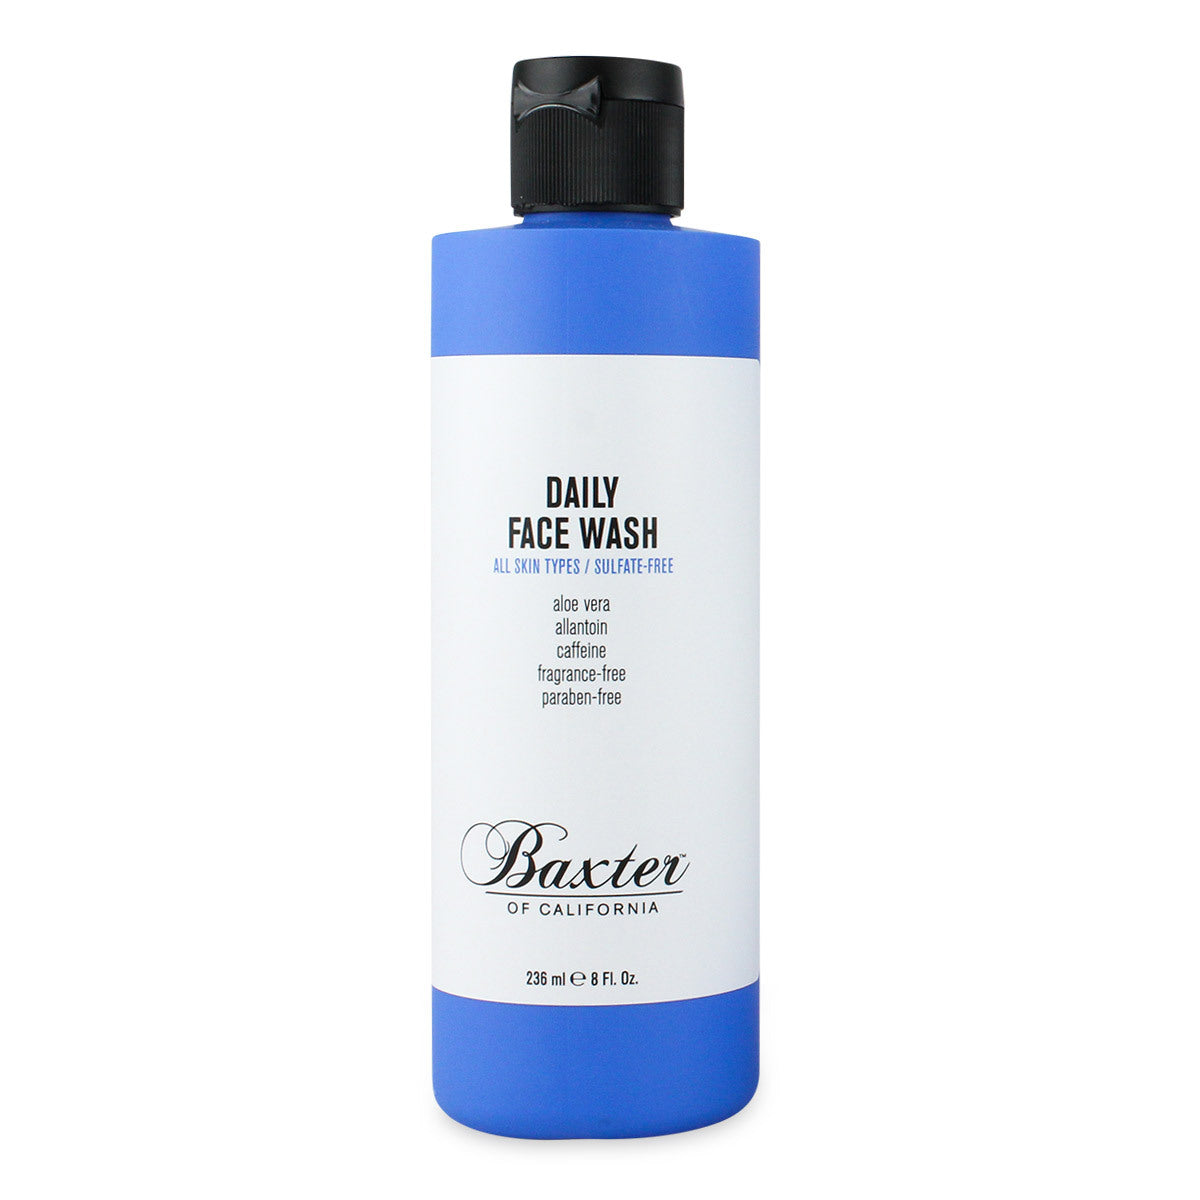 Primary image of Sulfate-Free Daily Face Wash